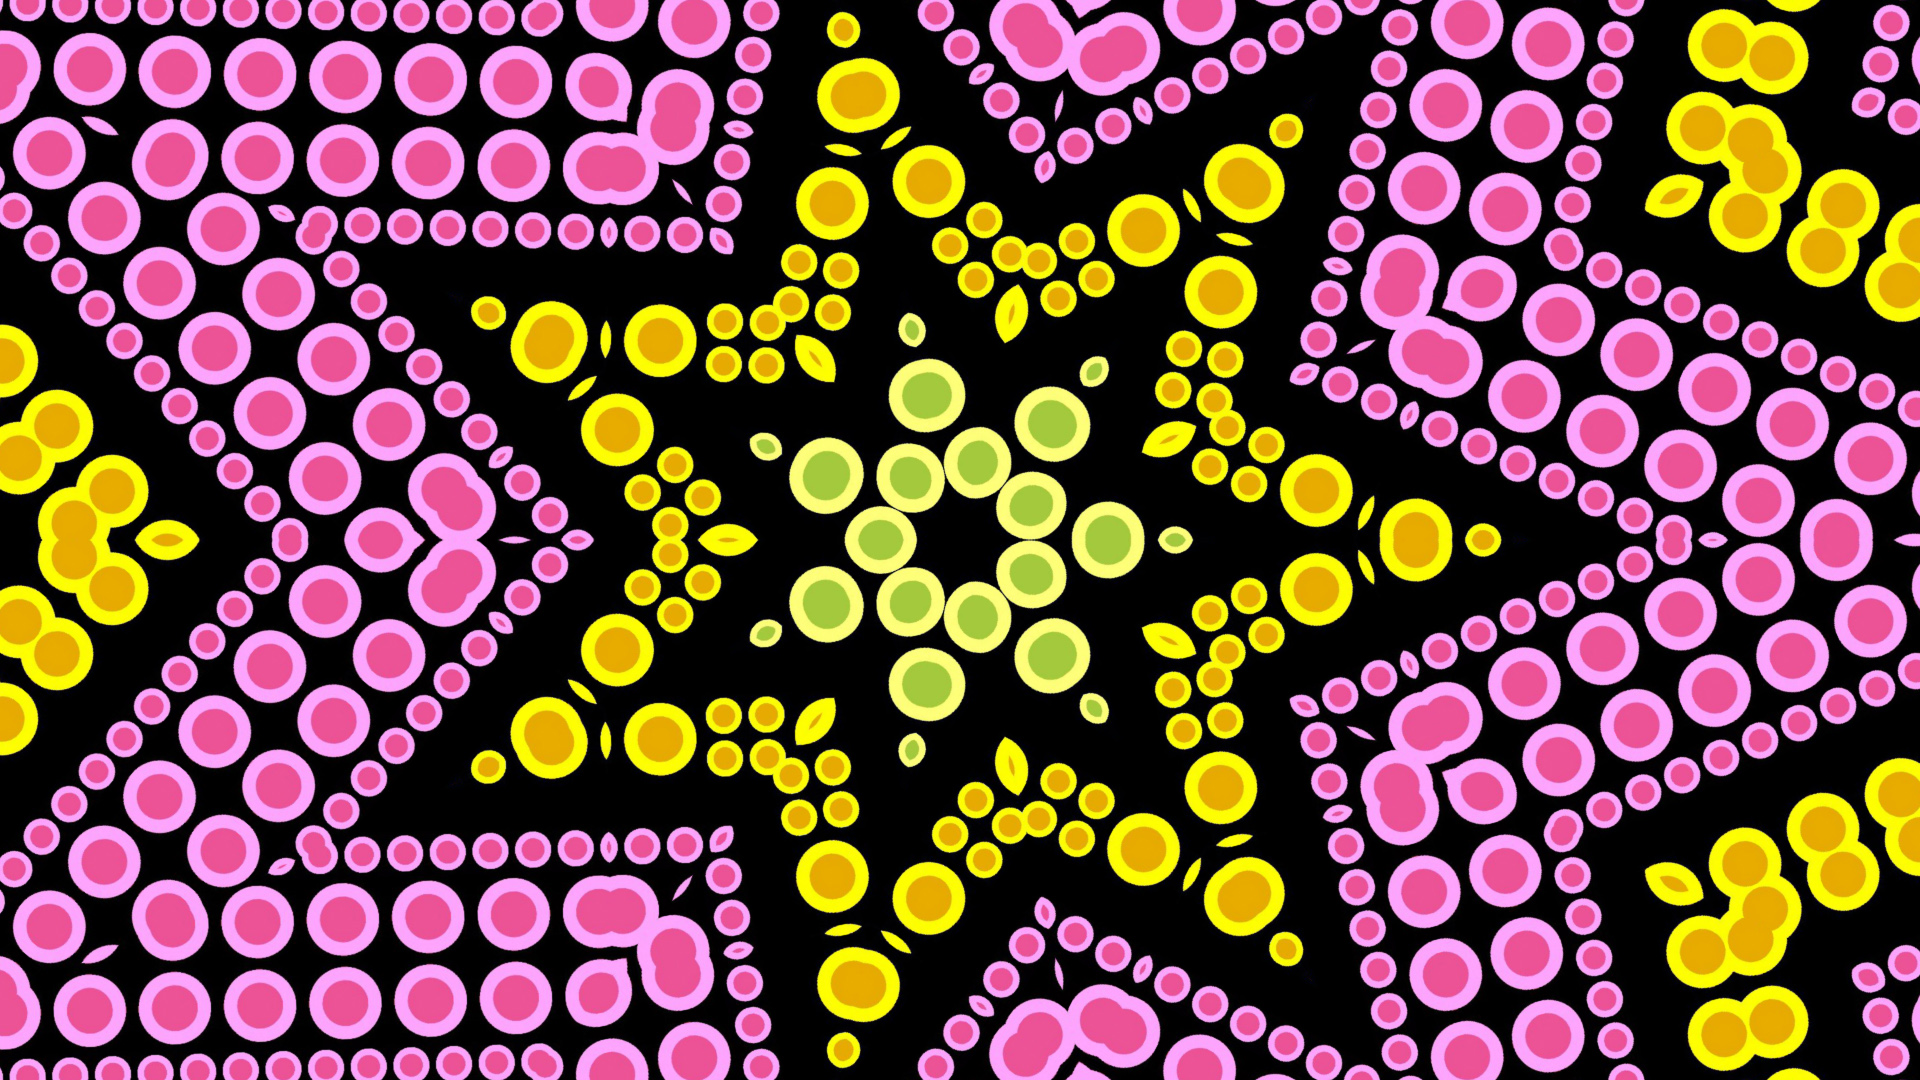 Abstract Artistic Colors Digital Art Kaleidoscope Pattern Shapes Star 1920x1080